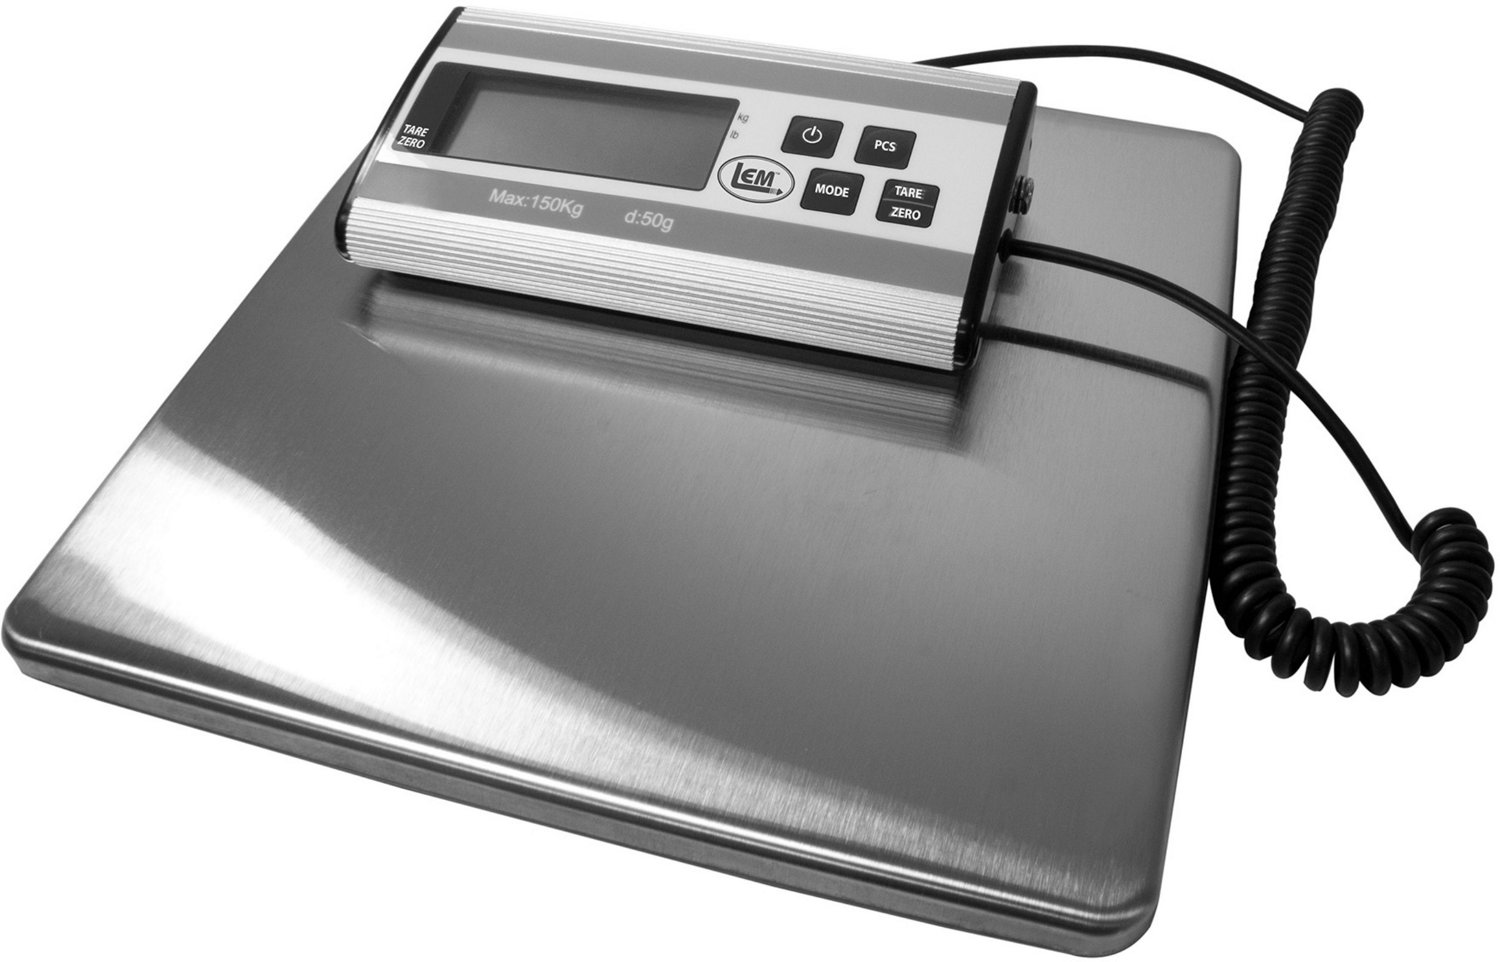 Meat 44 lb Scale - Food Processing at Academy Sports 1117122